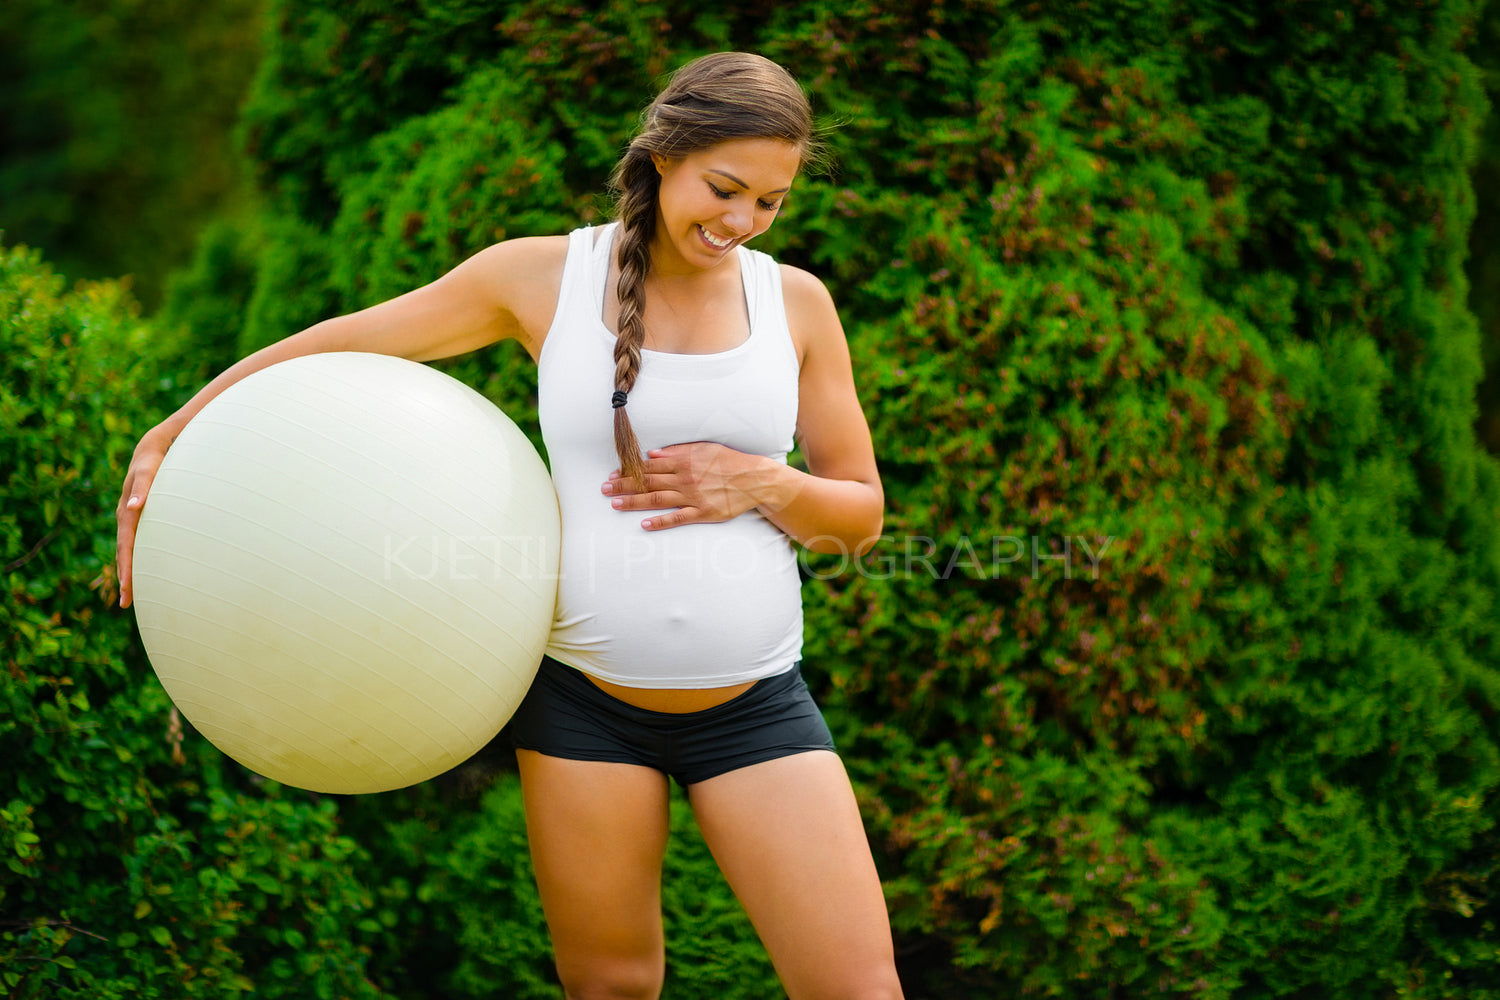 Expectant Mother Touching Stomach While Holding Exercise Ball In Park